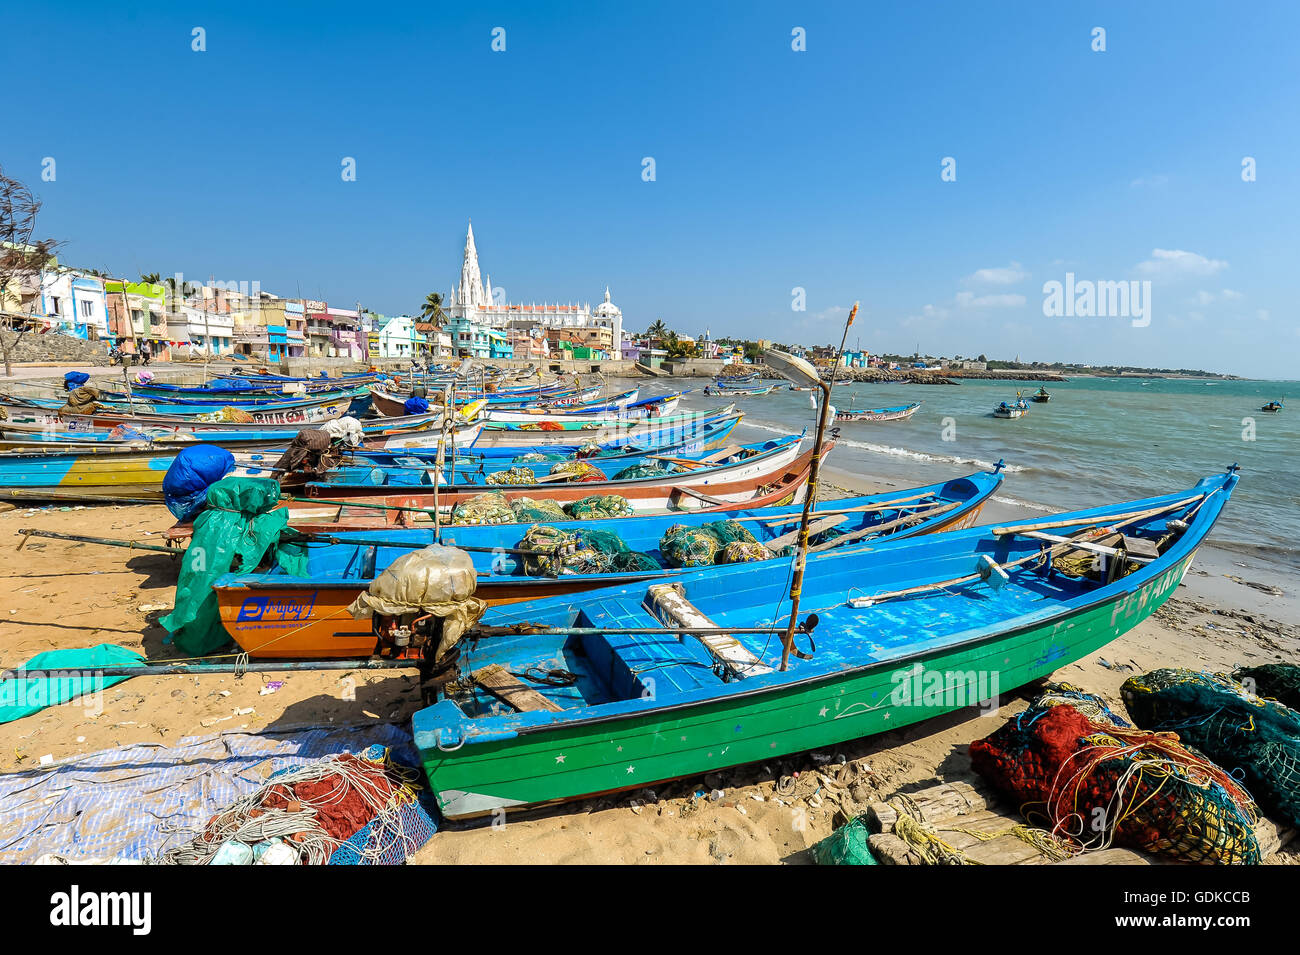 Colourful fishing boats in port, in the back pilgrimage church Our Lady of Ransom, Kanyakumari, Tamil Nadu, South India, India Stock Photo